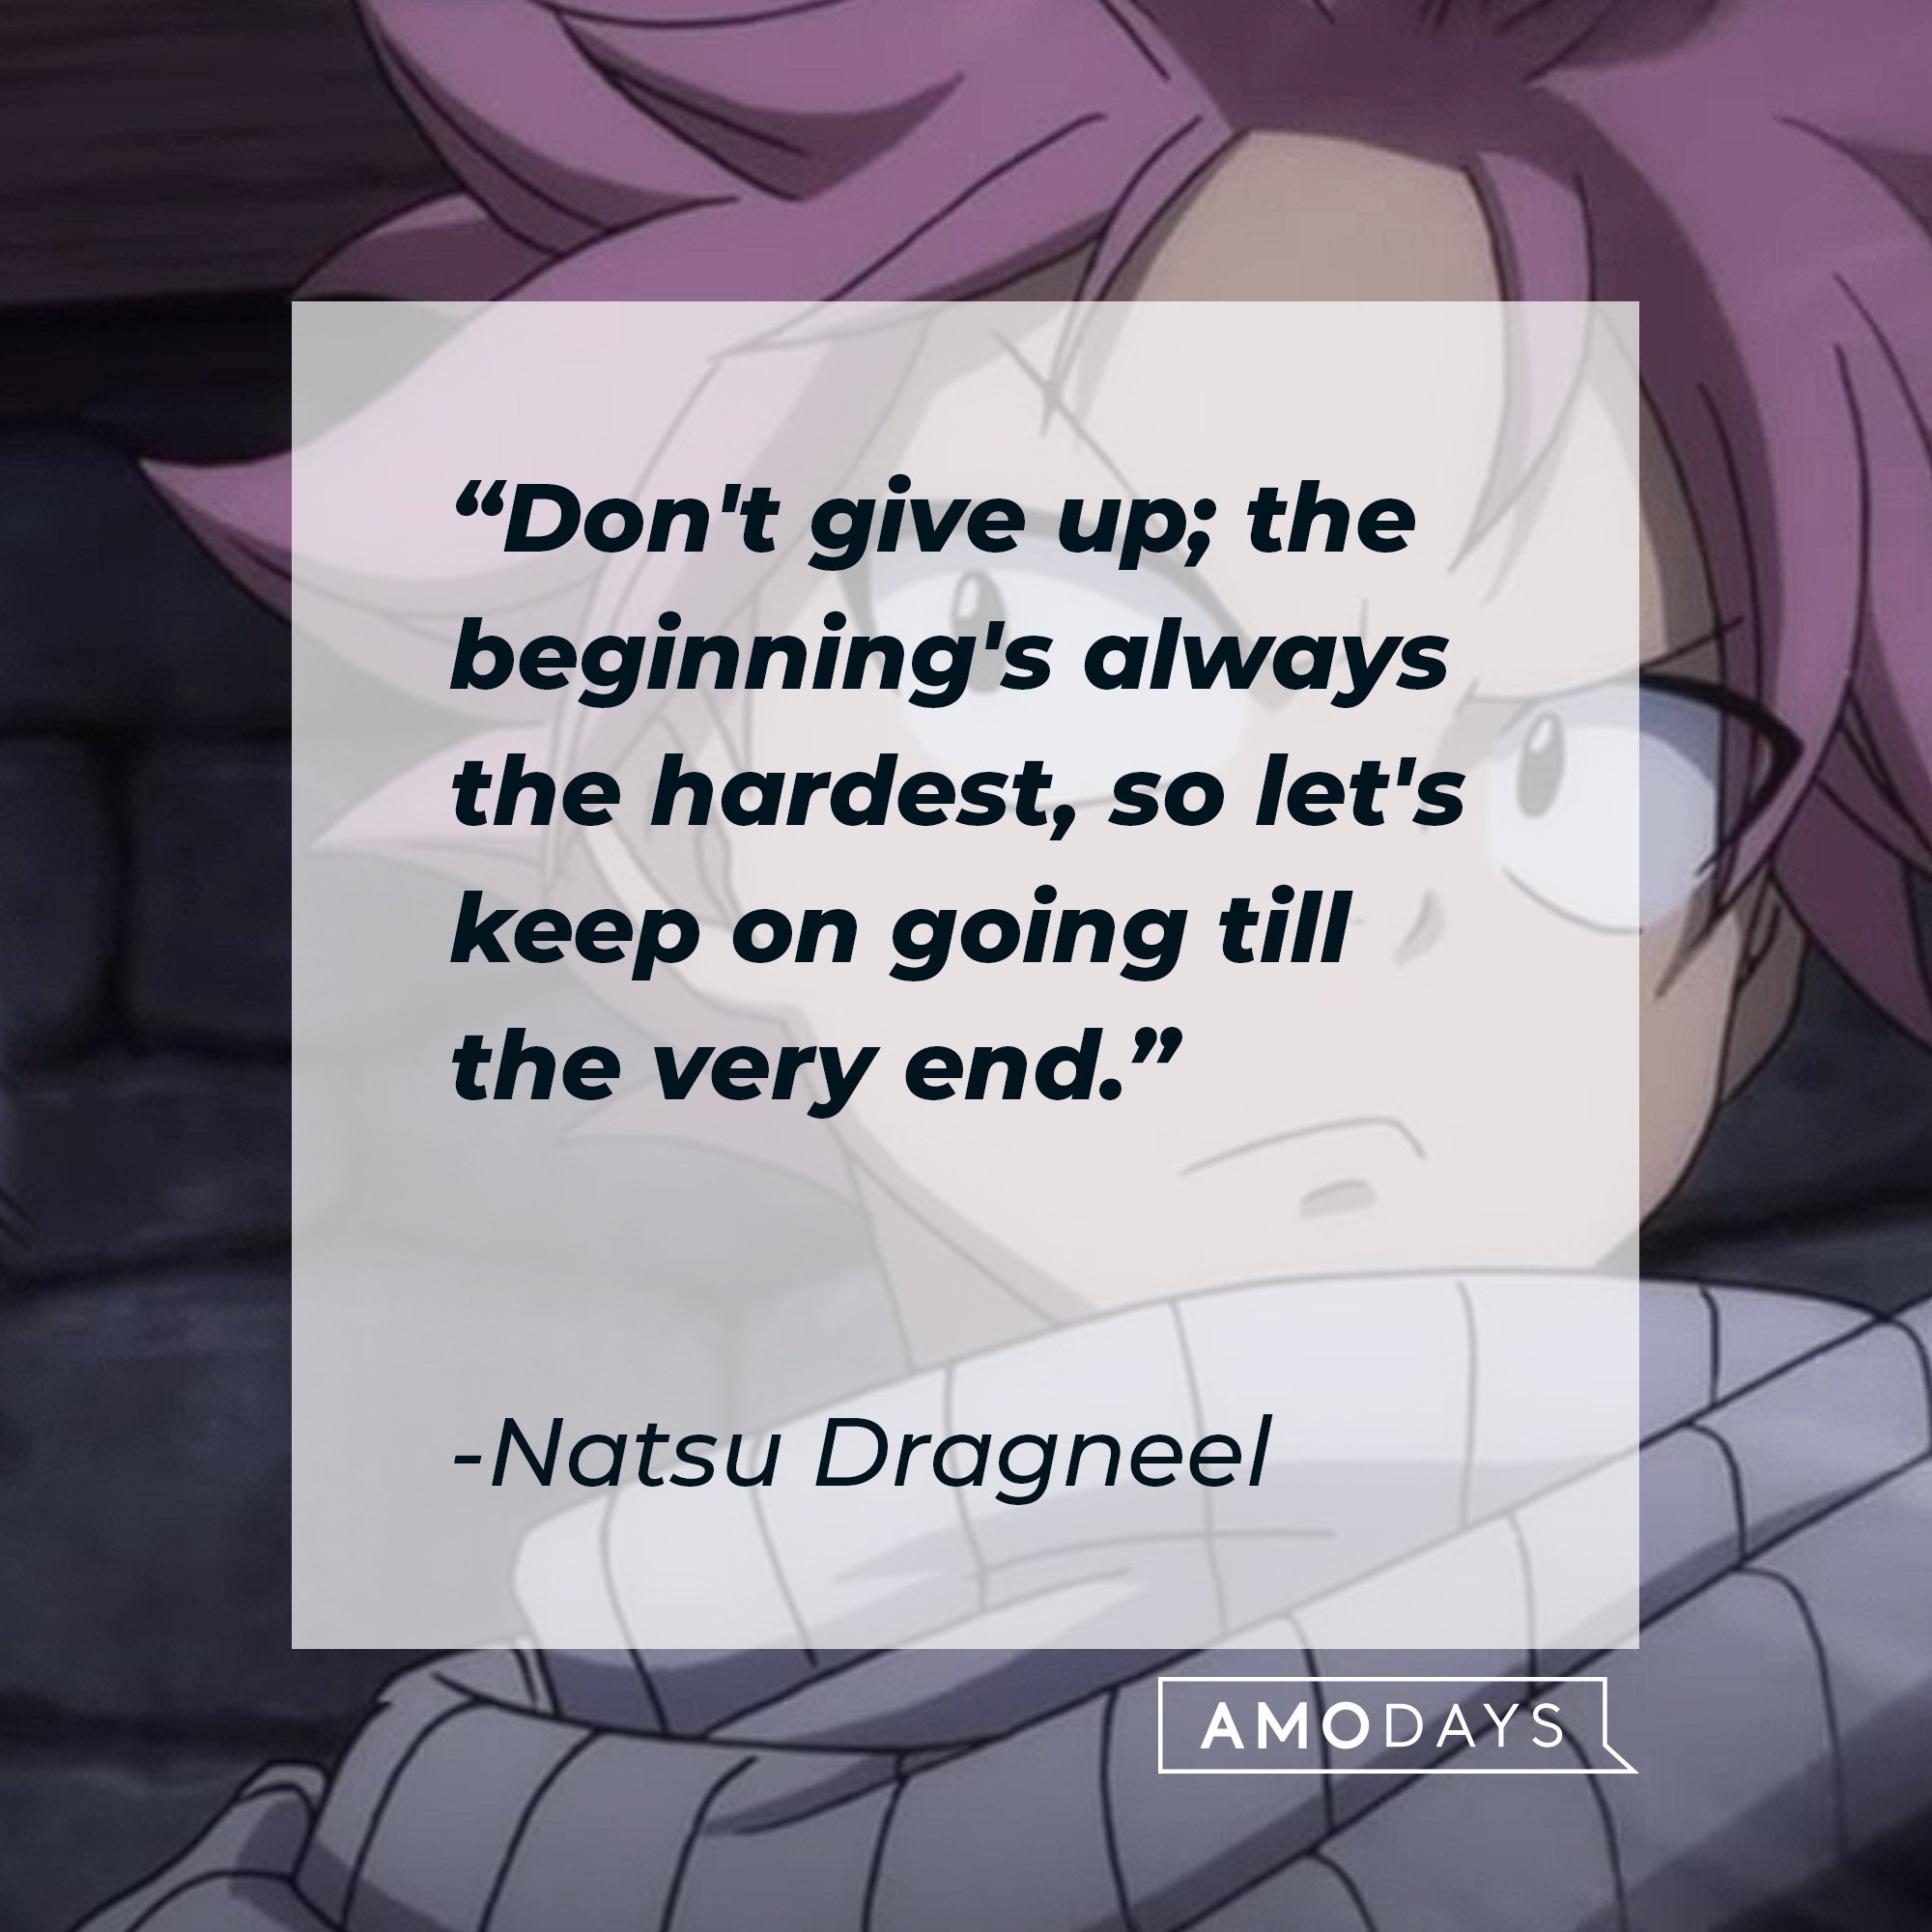 Natsu Dragneel's quote: "Don't give up; the beginning is always the hardest, so let's keep on going till the very end." | Image: AmoDays